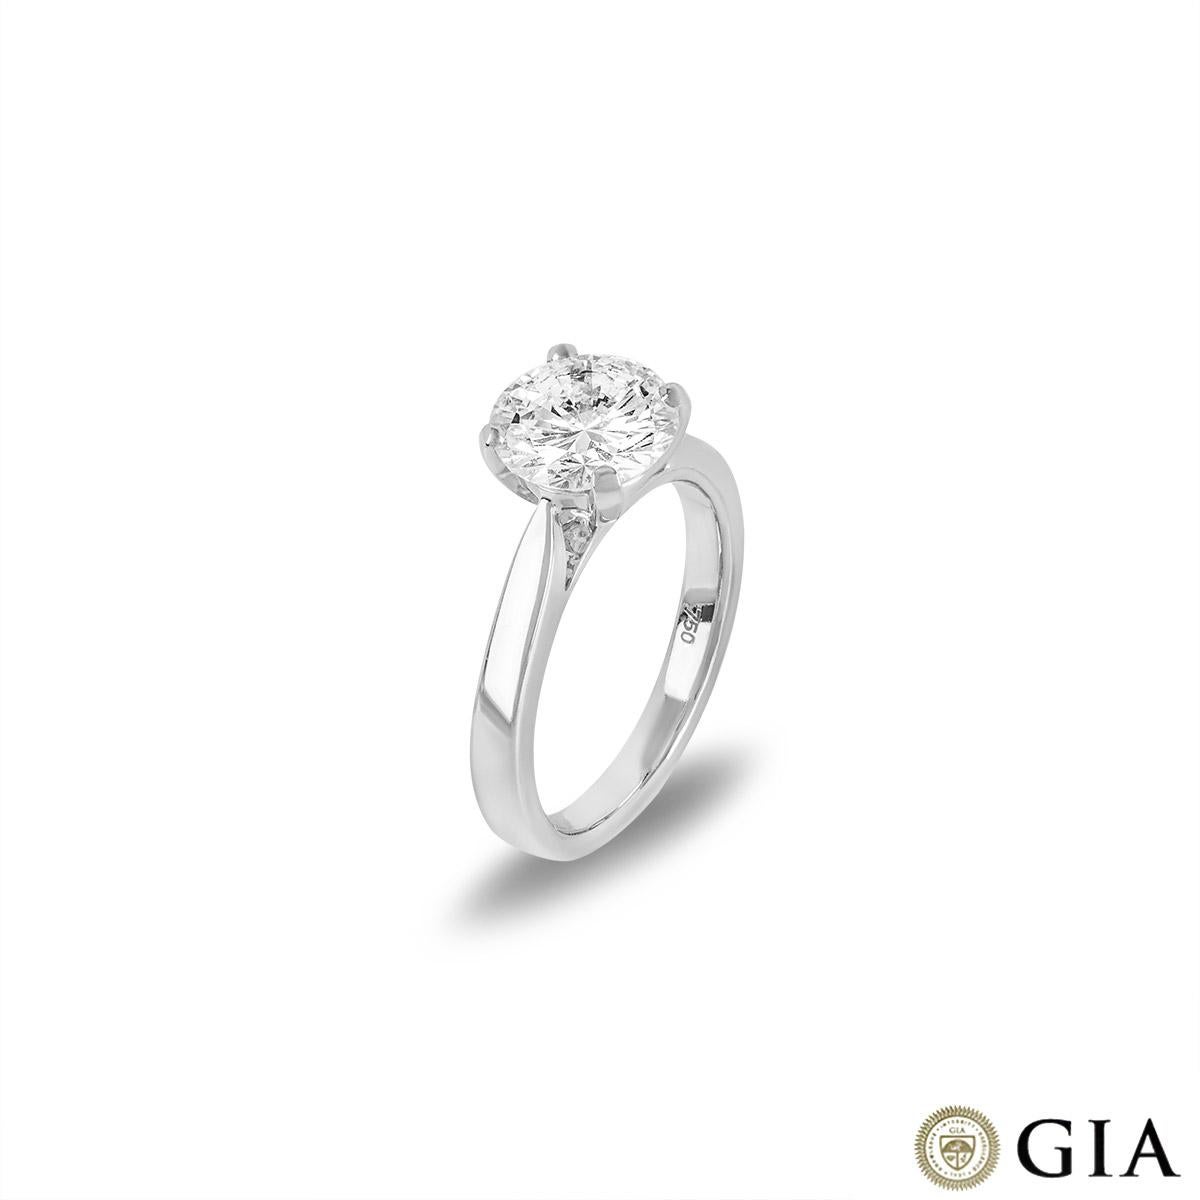 A beautiful 18k white gold diamond engagement ring. The central round brilliant cut diamond weighs 2.08ct, is E colour and VVS2 in clarity. The ring is currently a size UK M½/US 6.25/EU 53 but can be adjusted for a perfect fit. The ring has a gross